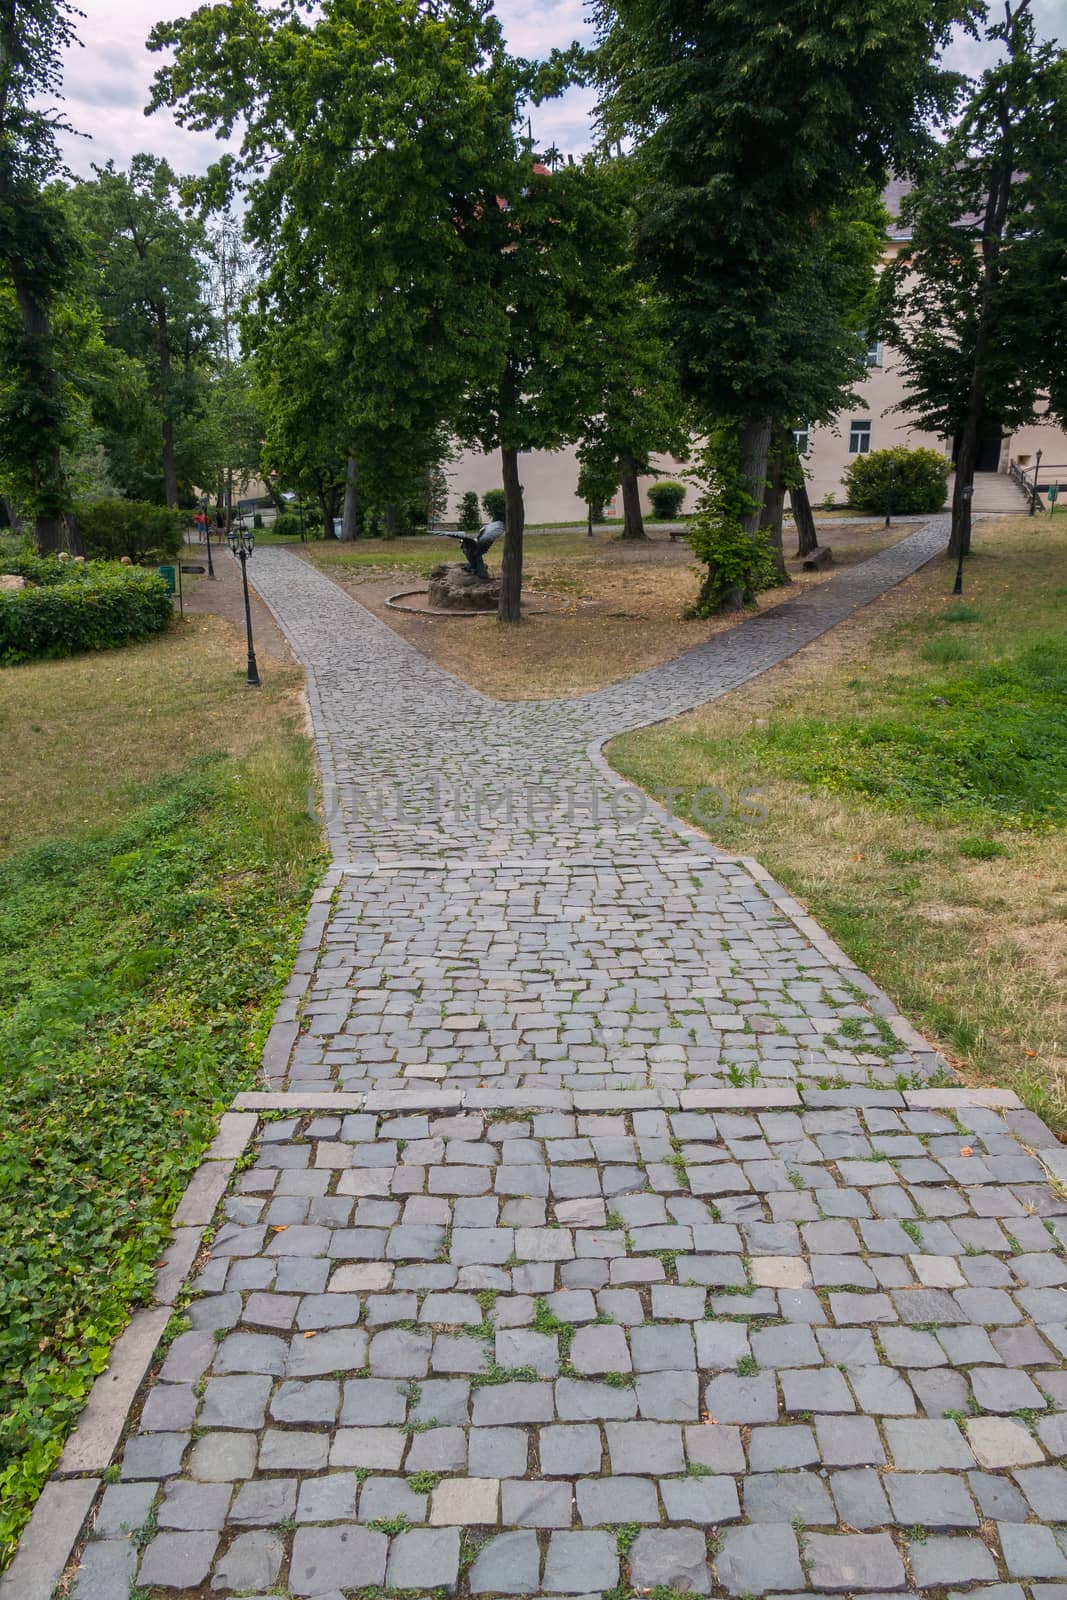 Stepped path in the park running between green trees with standing sculptures on the side of it and leading to the building in the distance.